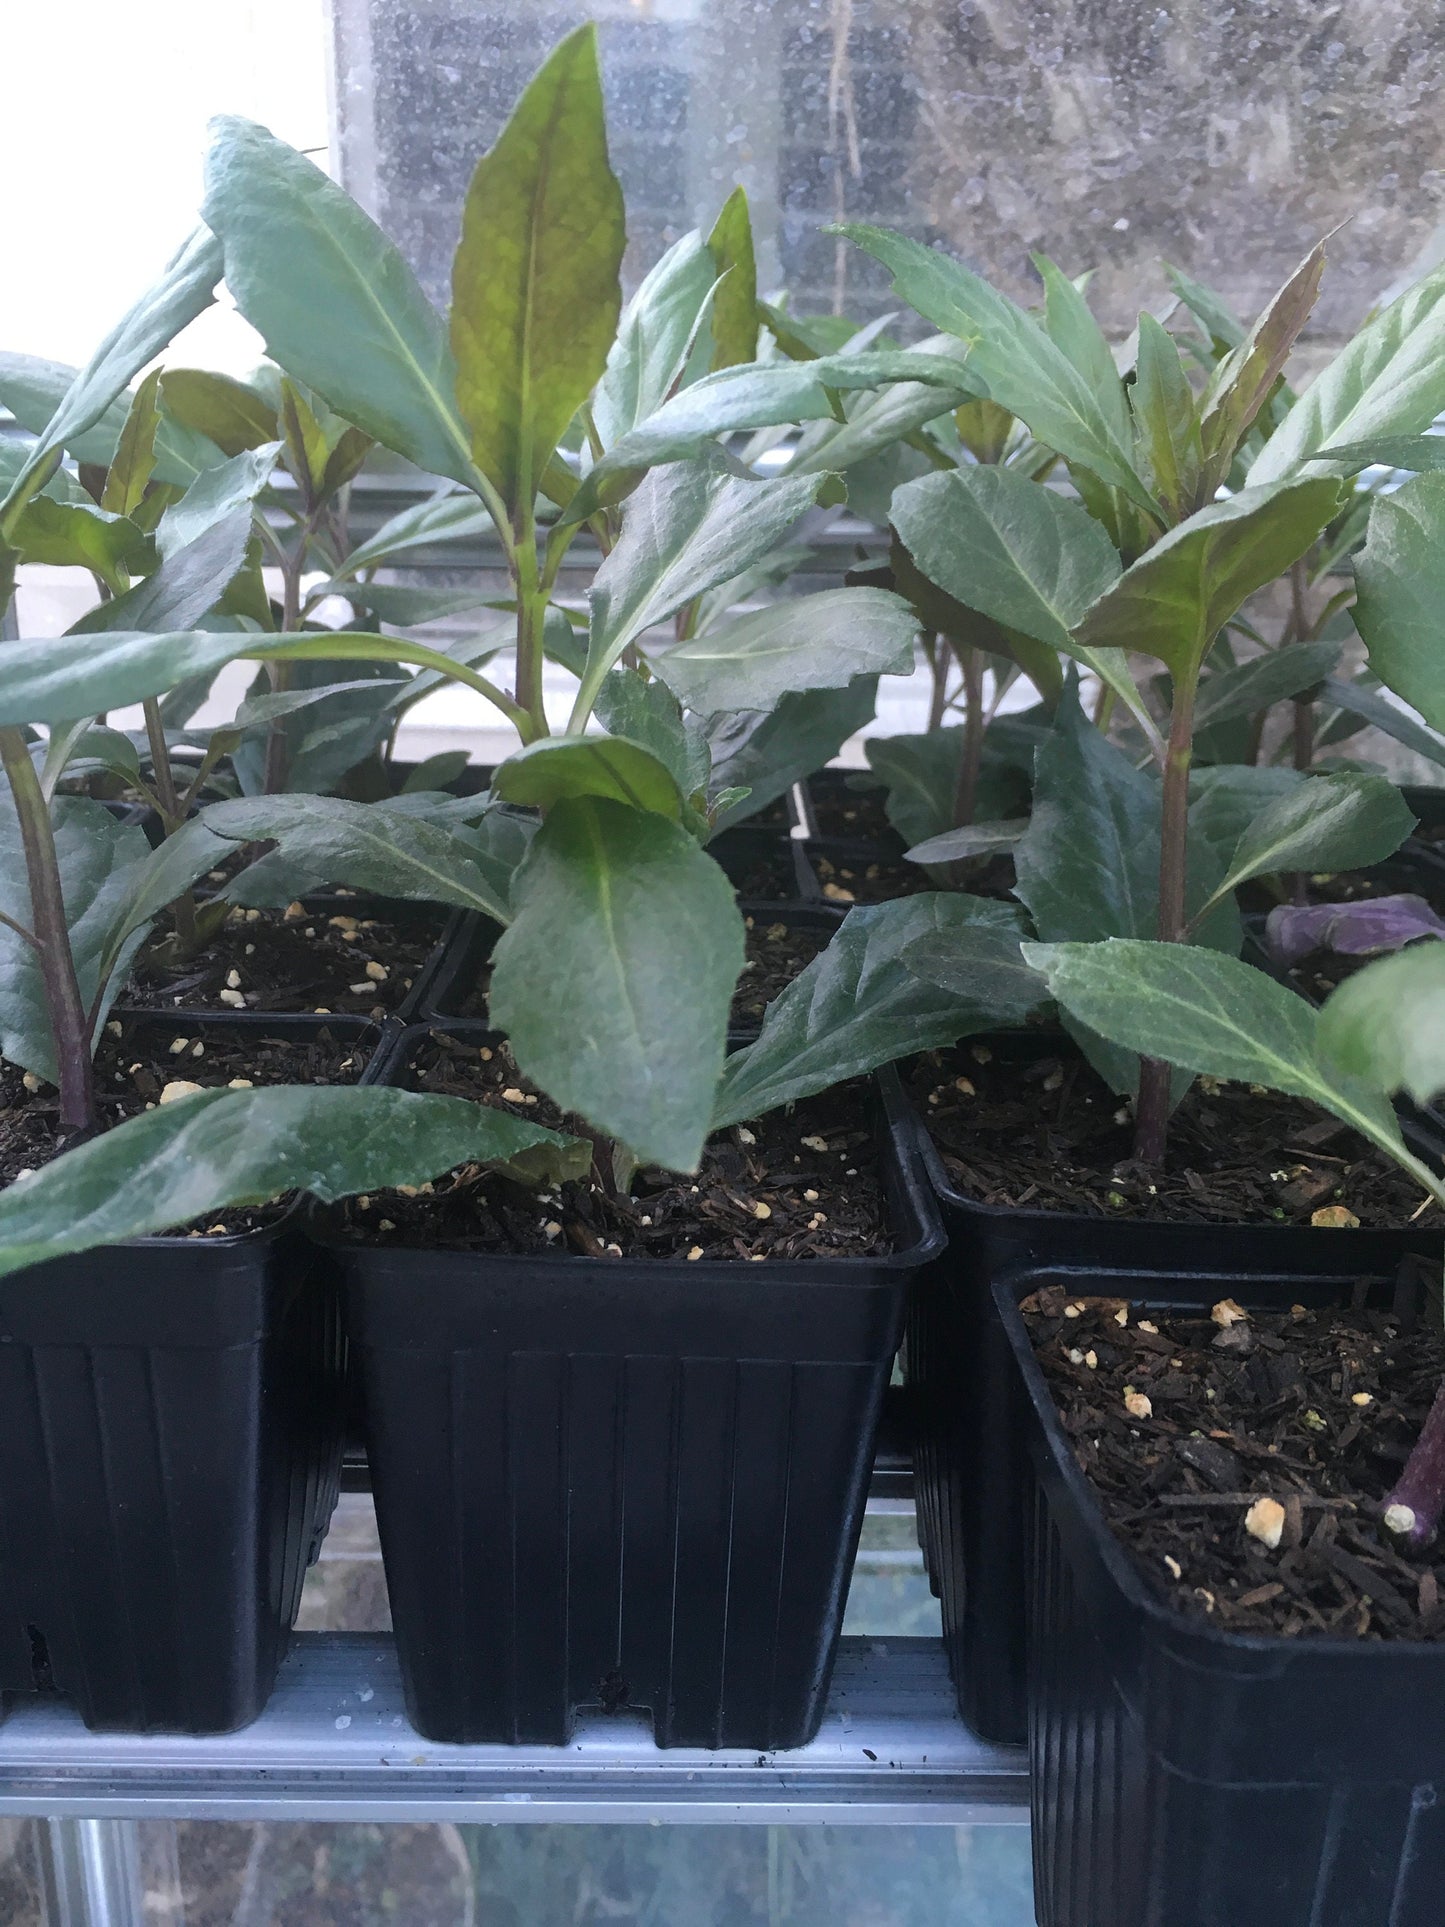 Perennial Spinach Sale- 1 Longevity Spinach (Gynura Procumbens) and 1 Okinawa Spinach LIVE PLANTS